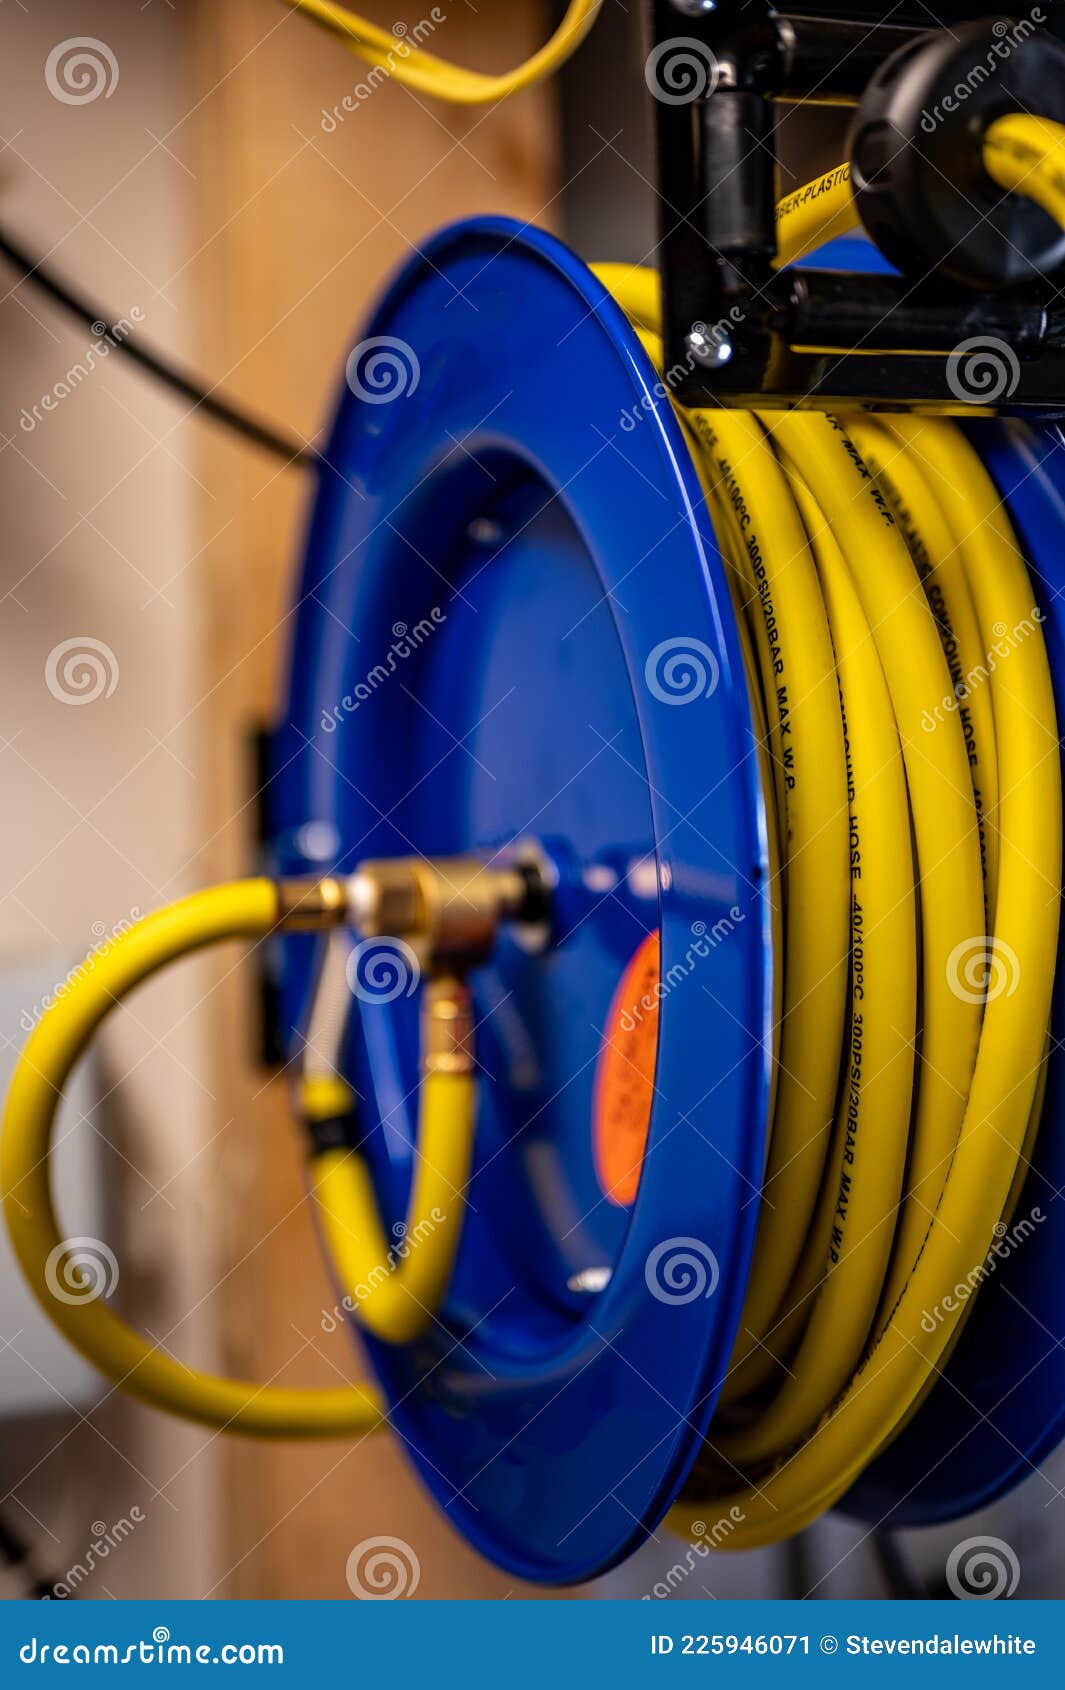 Auto-rewinding Air Hose Reel with Coiled Tubing Mounted on a Wall in a Shop  Stock Image - Image of flexible, compressor: 225946071